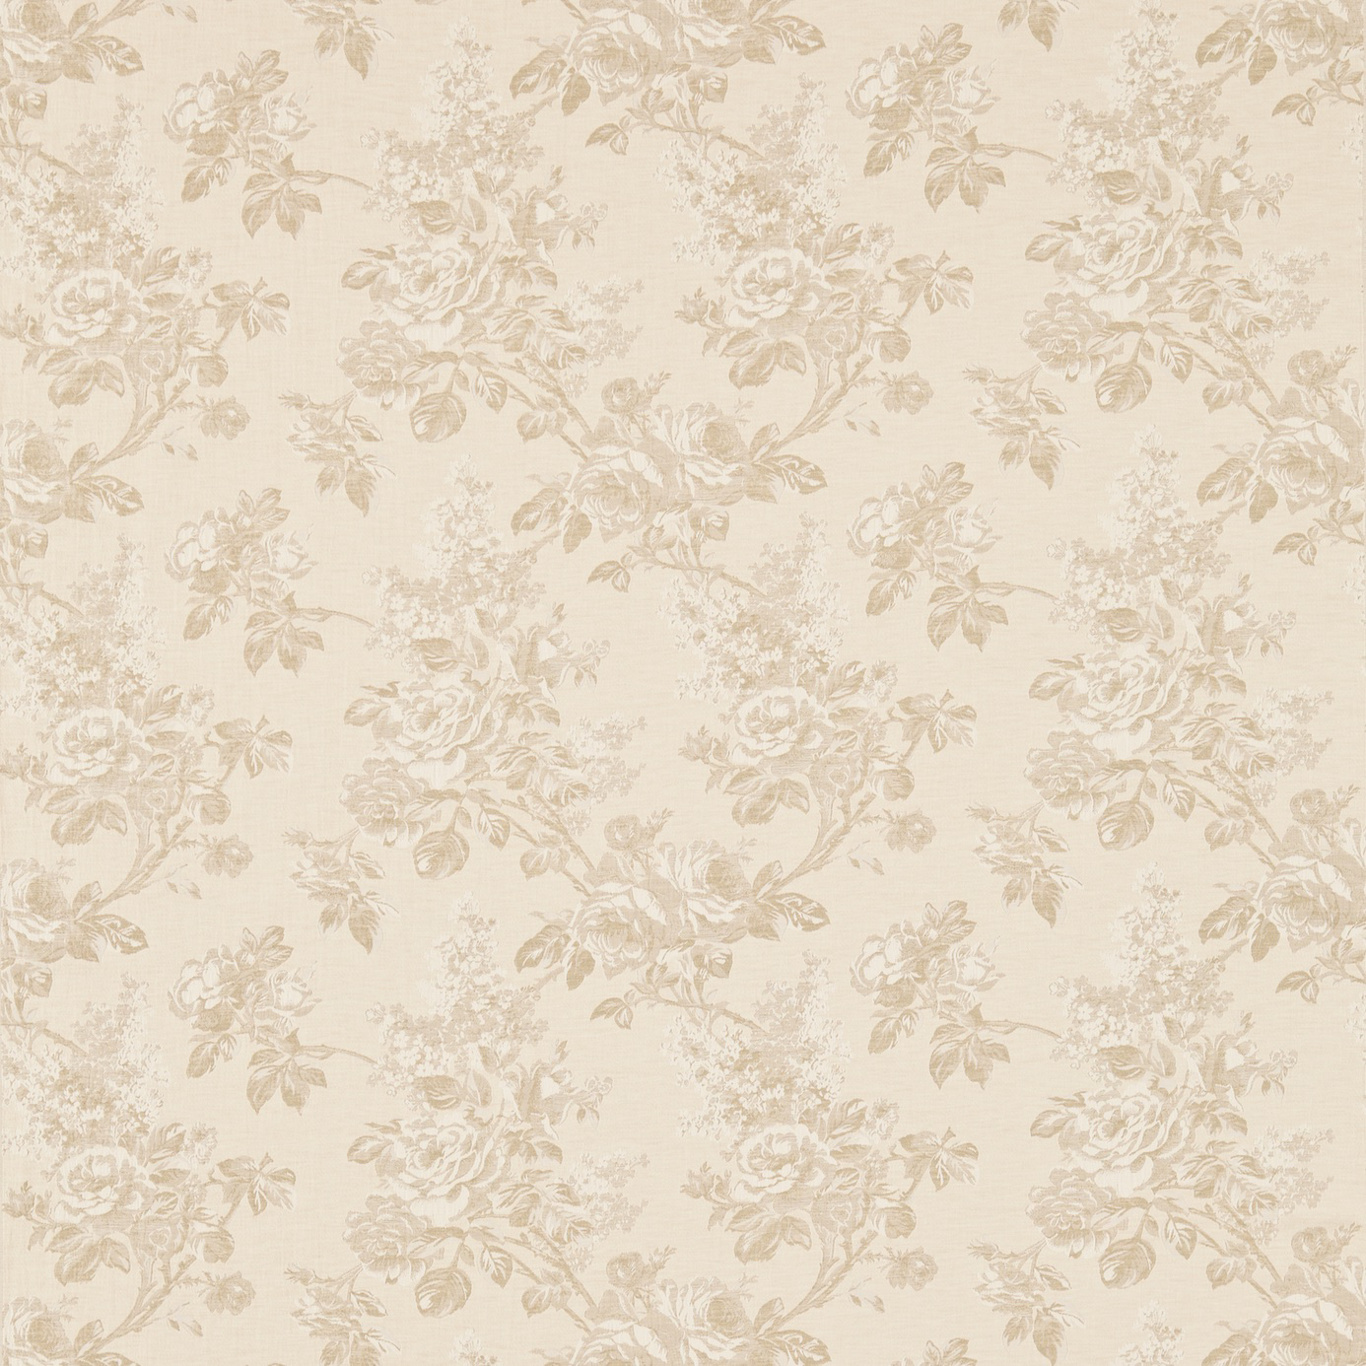 Sorilla Damask Linen/Calico Fabric by SAN